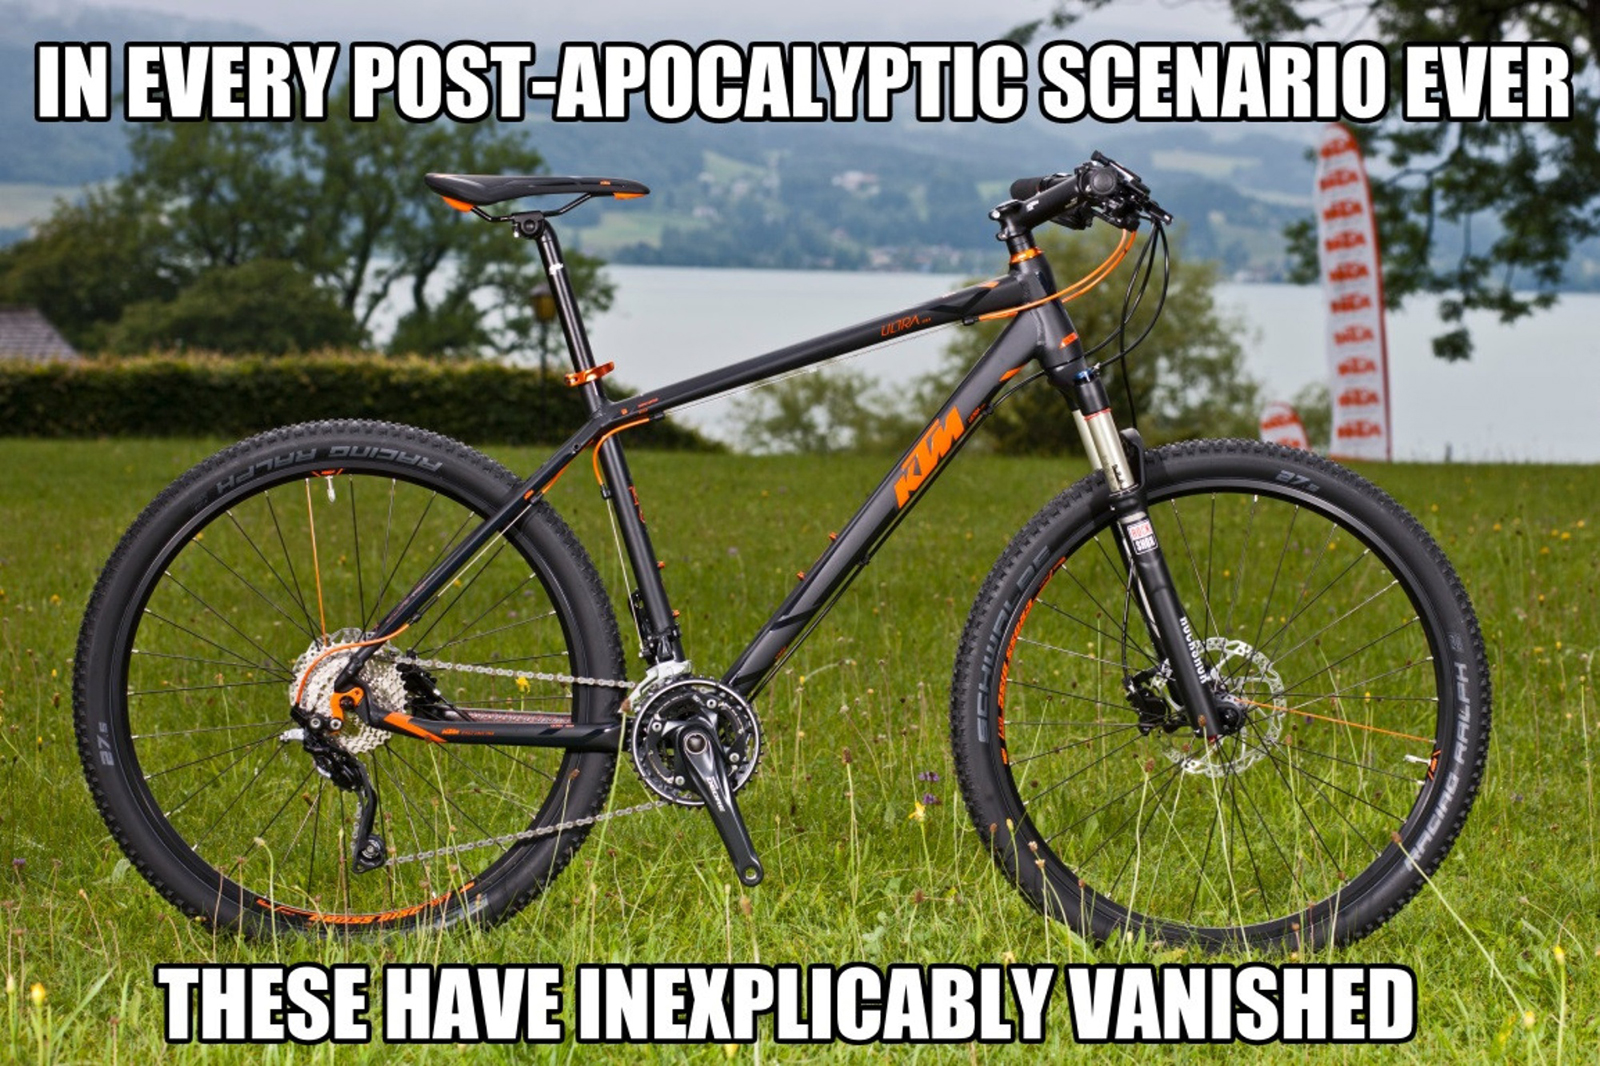 post apocalypse bicycle - In Every PostApocalyptic Scenario Ever These Have Inexplicably Vanished